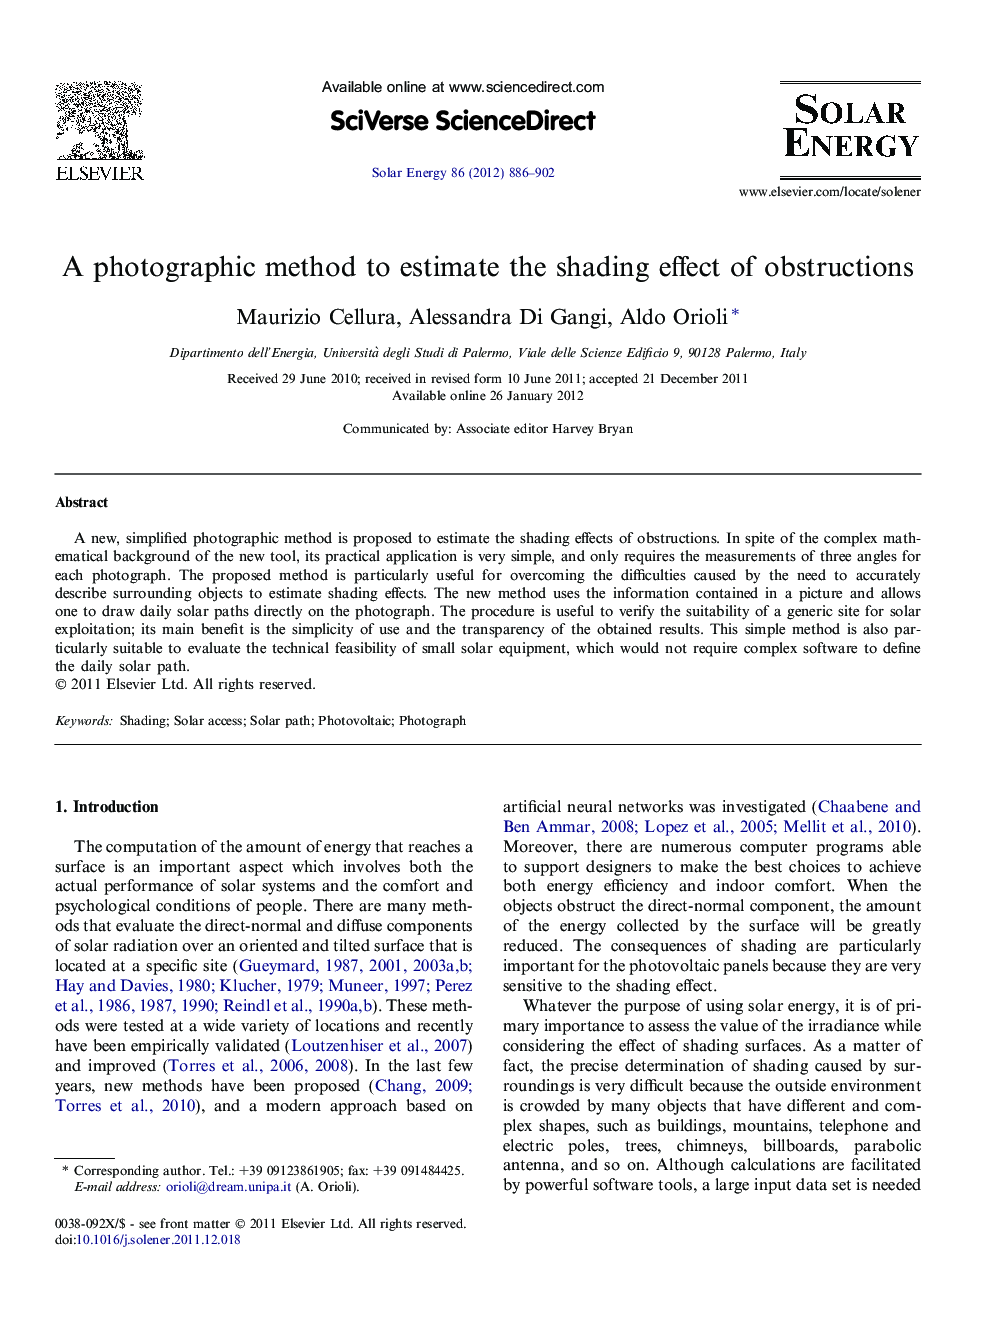 A photographic method to estimate the shading effect of obstructions